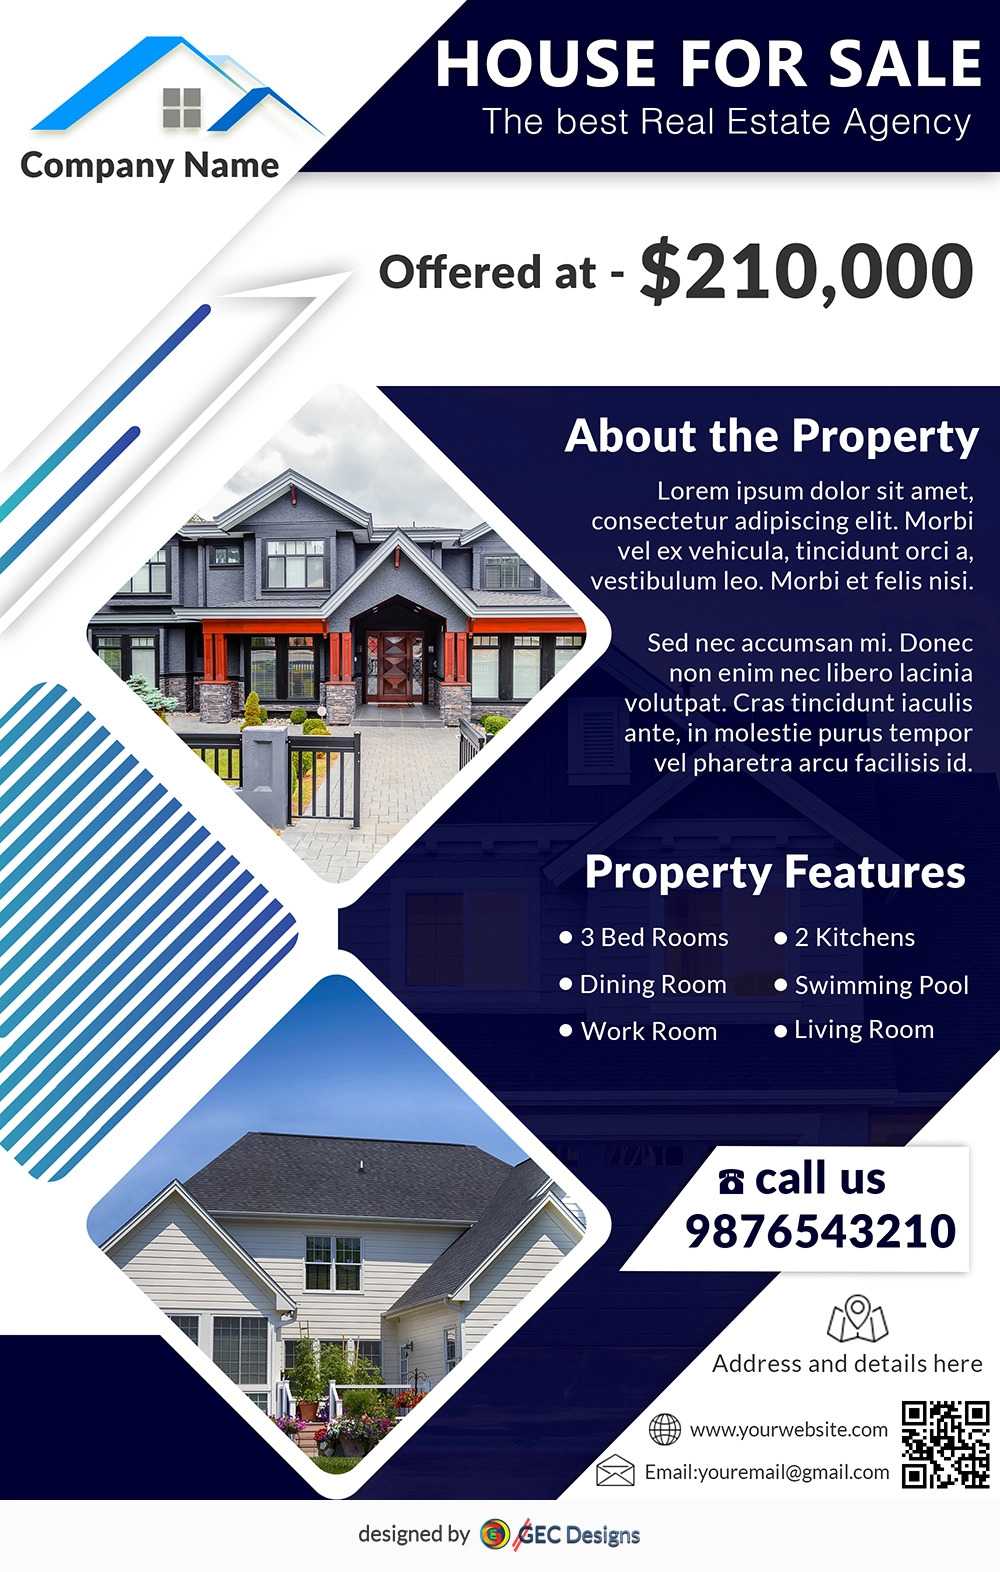 Download Free Property For Sale Real Estate Flyer Design Within Free House For Sale Flyer Templates